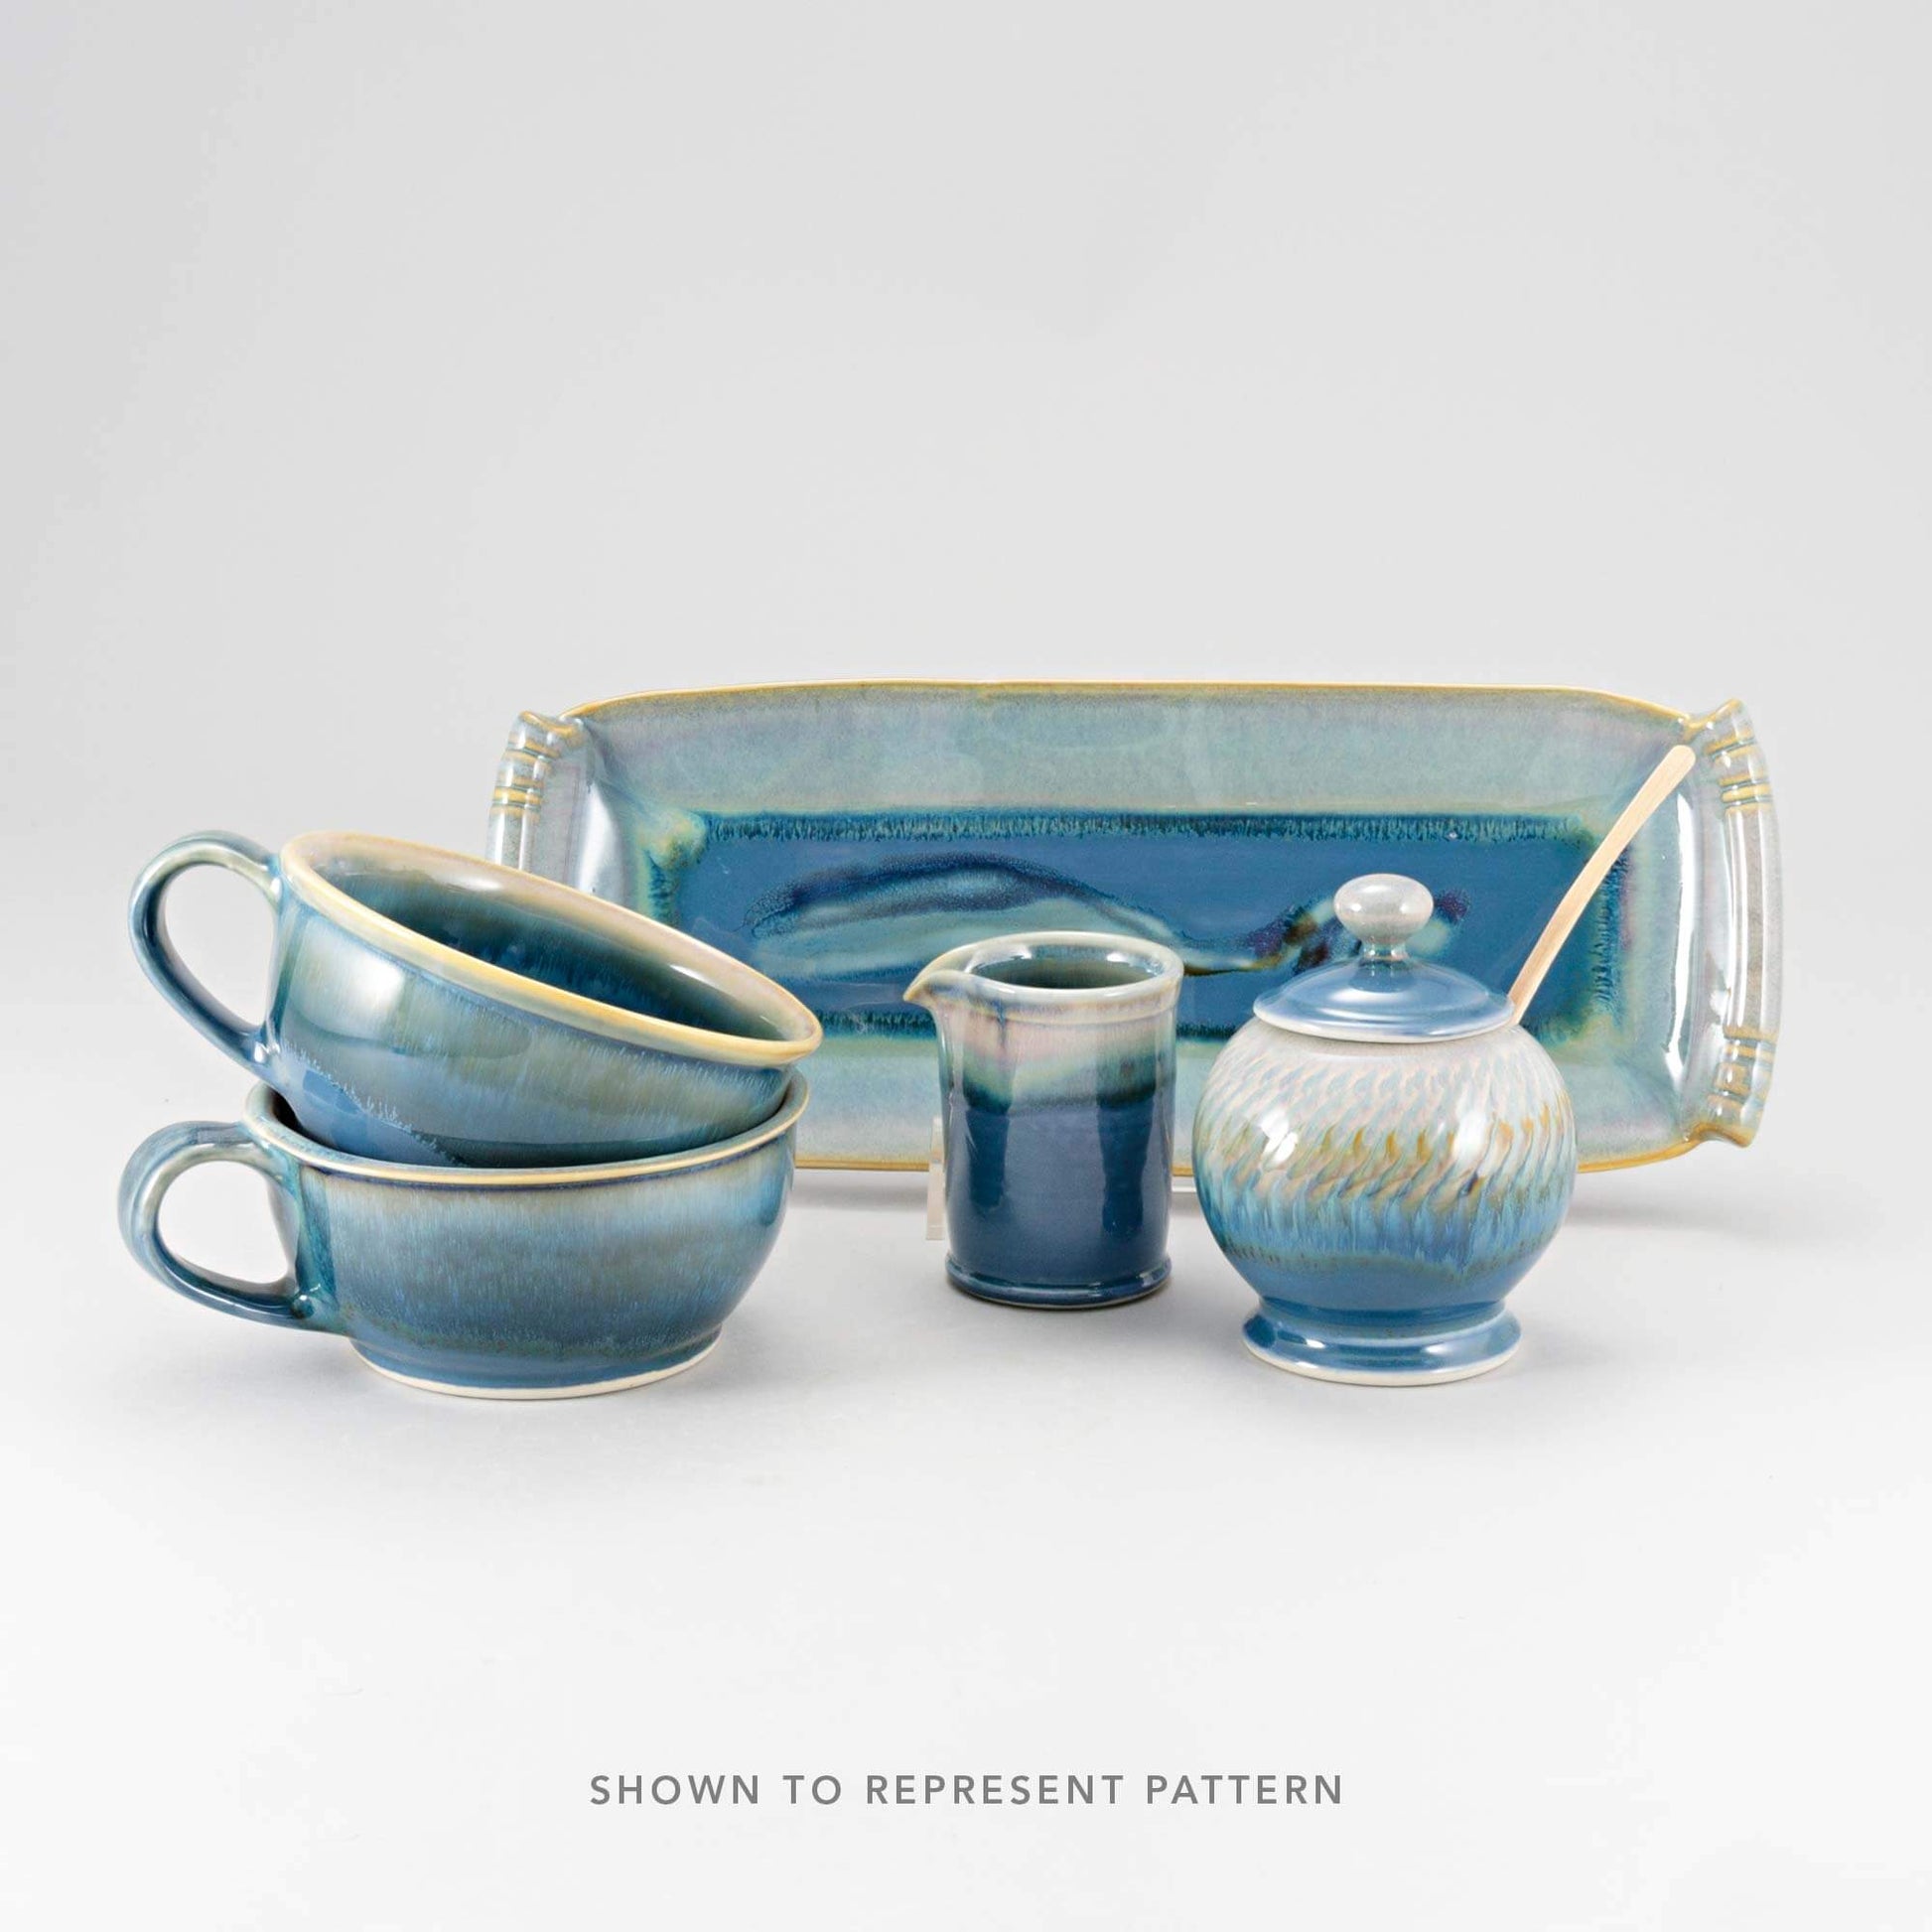 Handmade Pottery Noodle Bowl in Blue Oribe pattern made by Georgetown Pottery in Maine